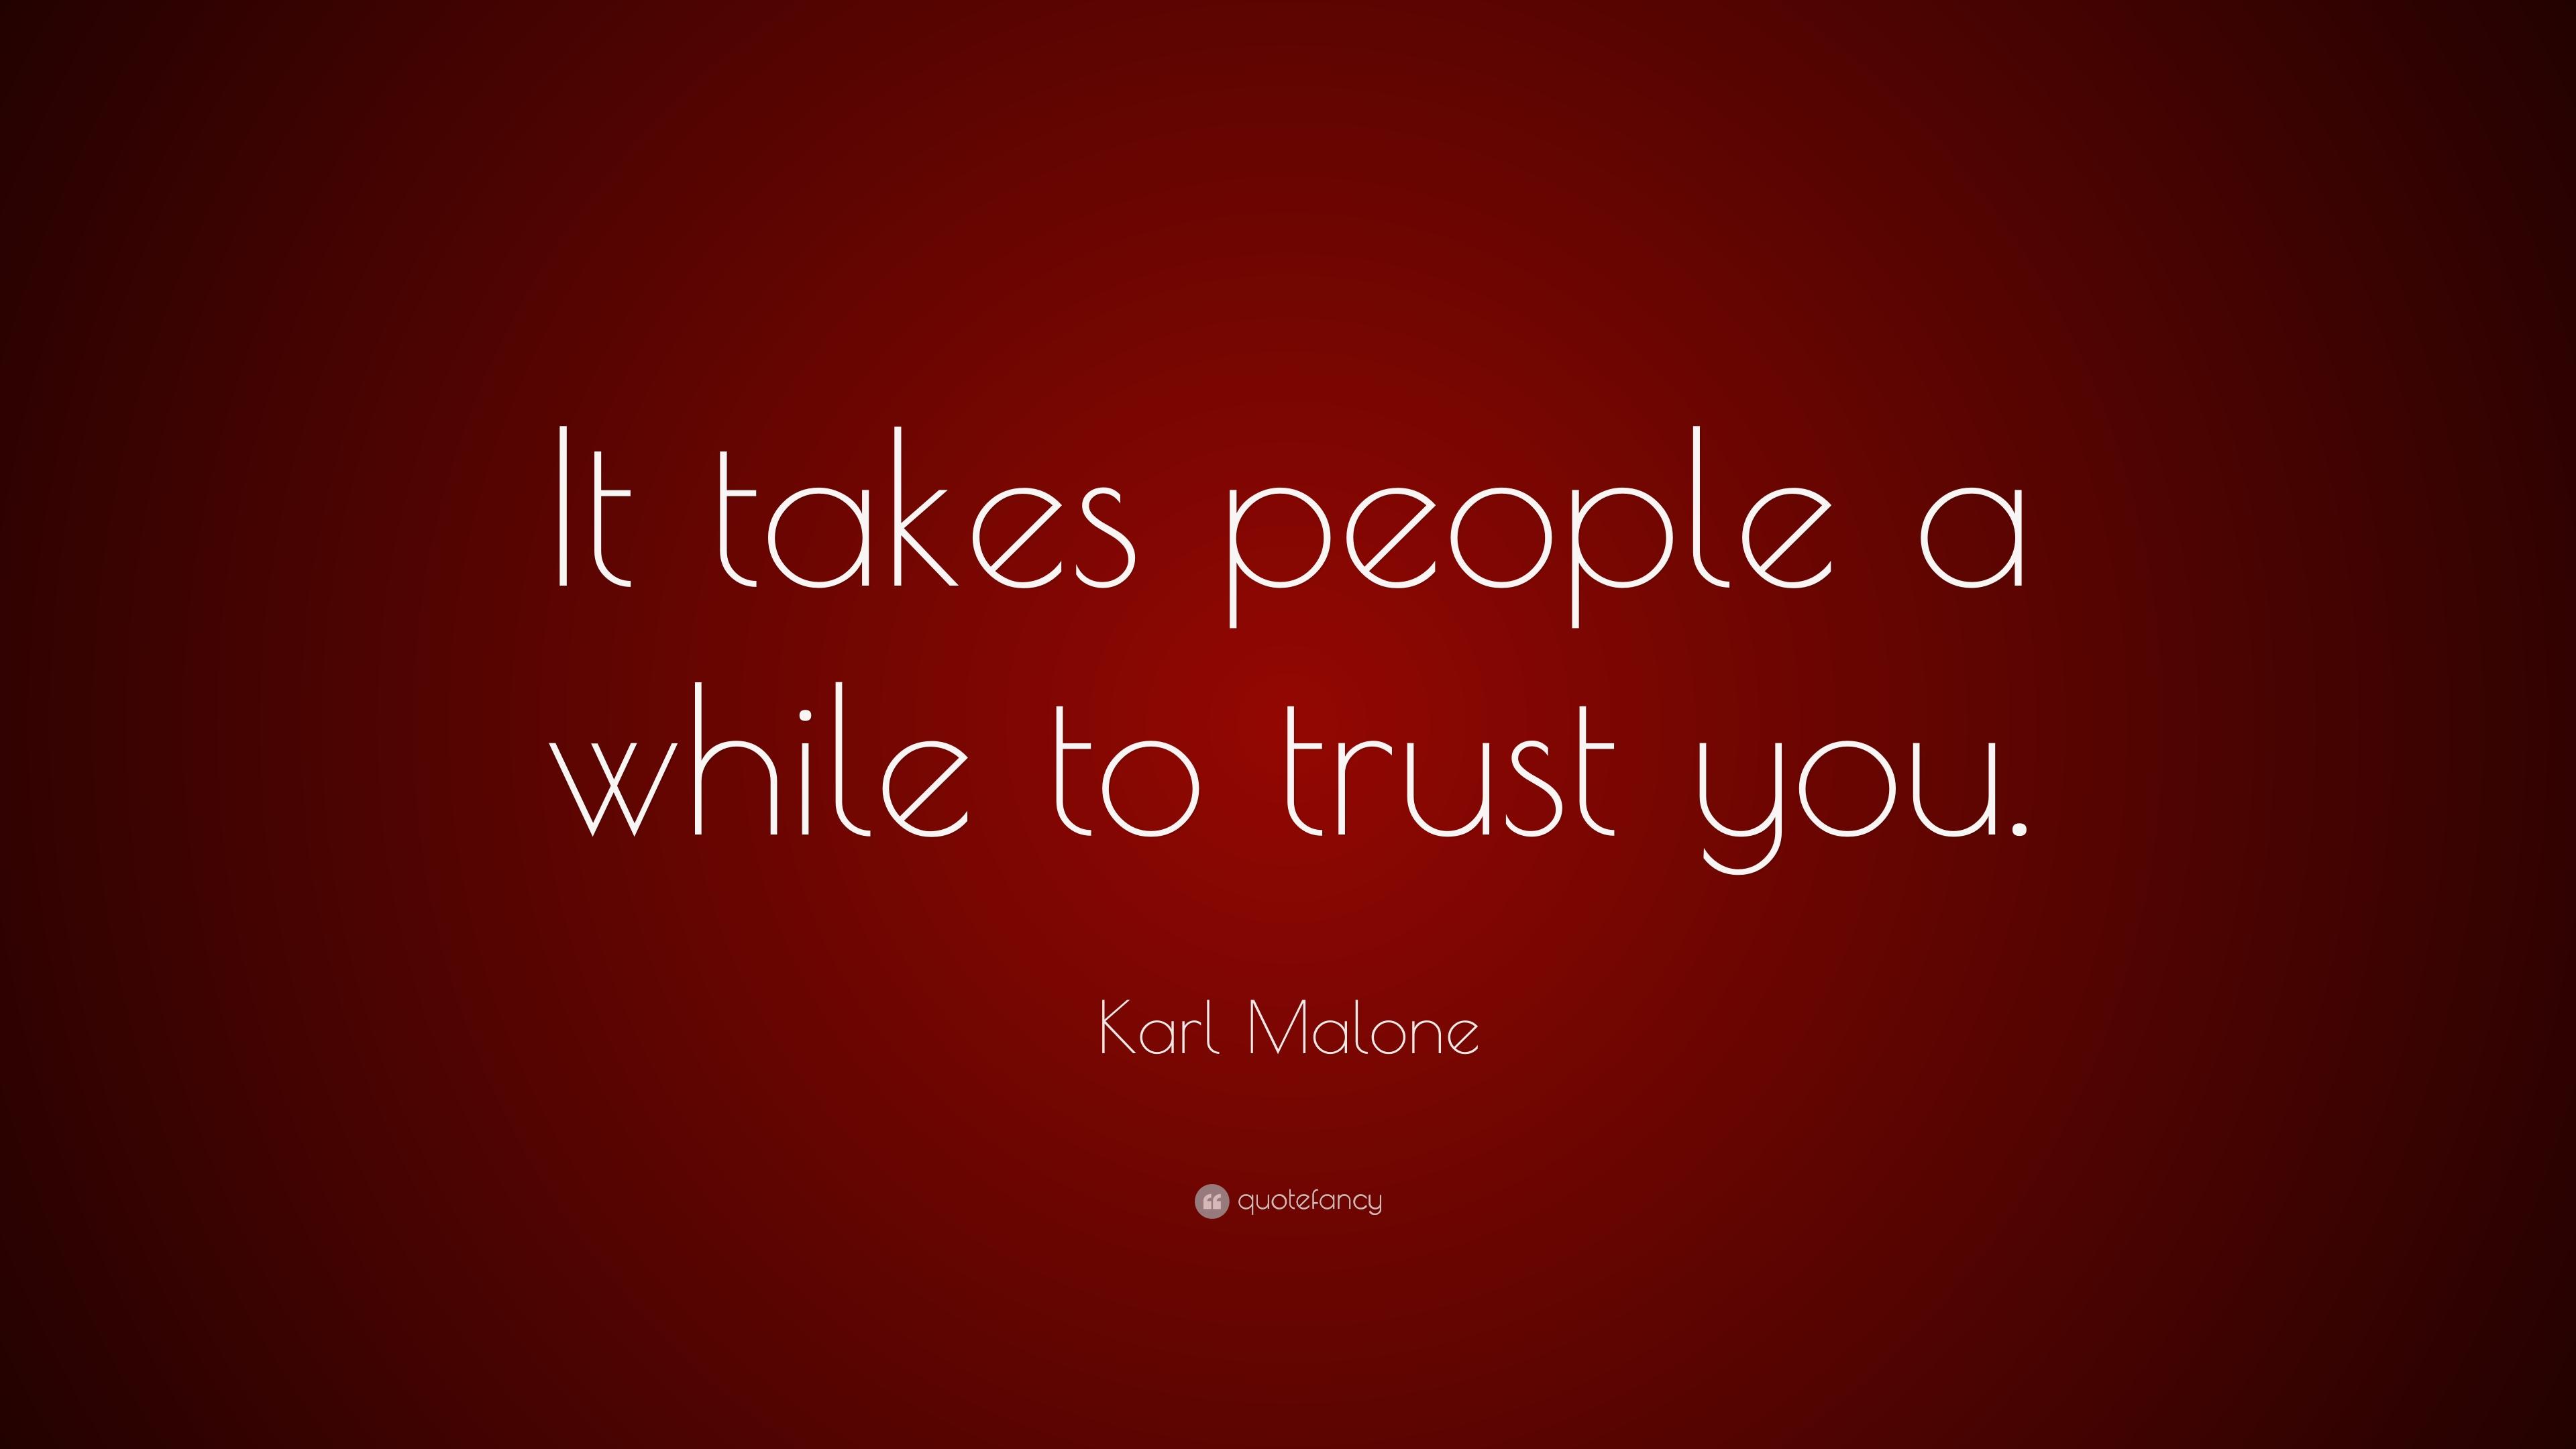 Karl Malone Quote: “It takes people a while to trust you.” 7